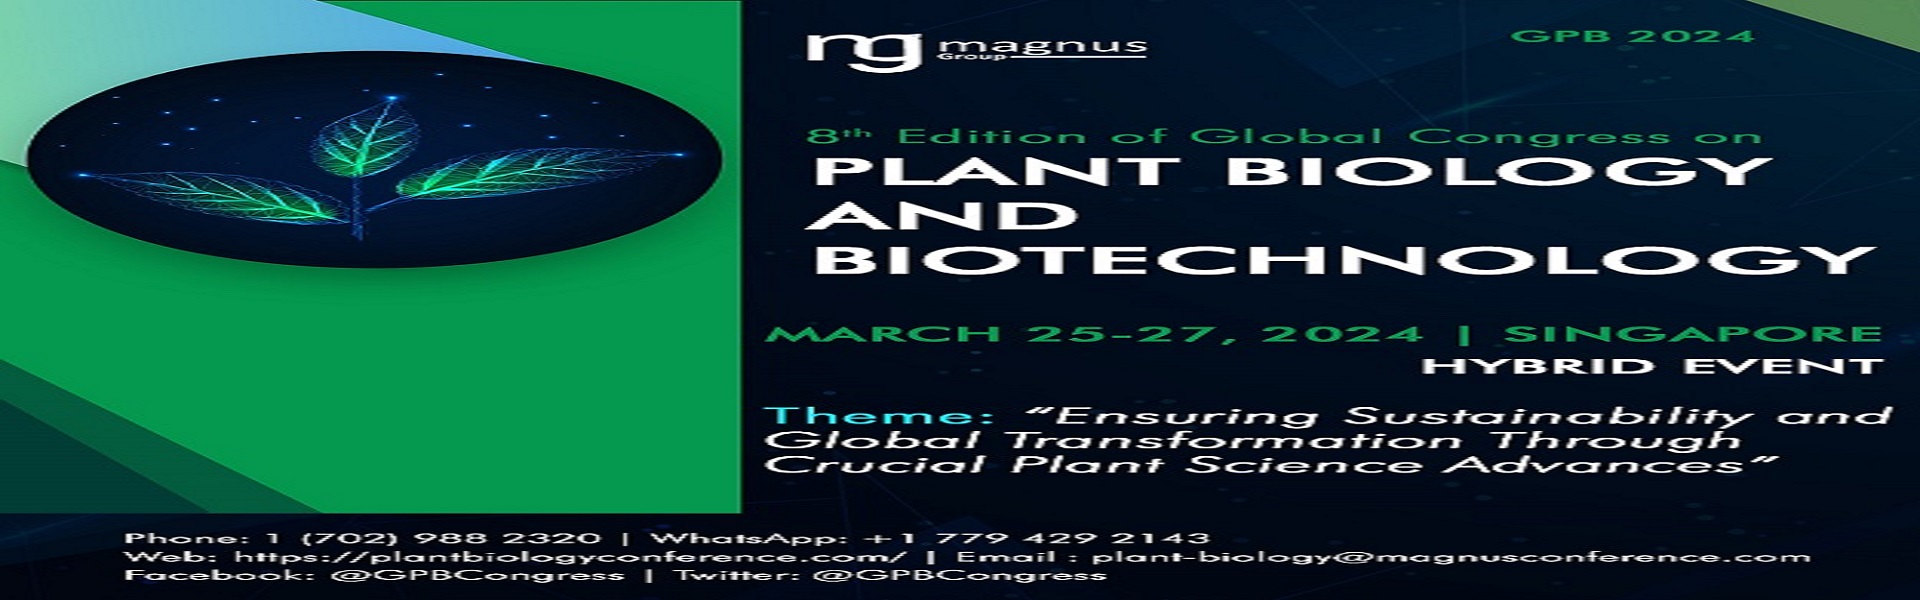 8th Edition of Global Congress on Plant Biology and Biotechnology (GPB